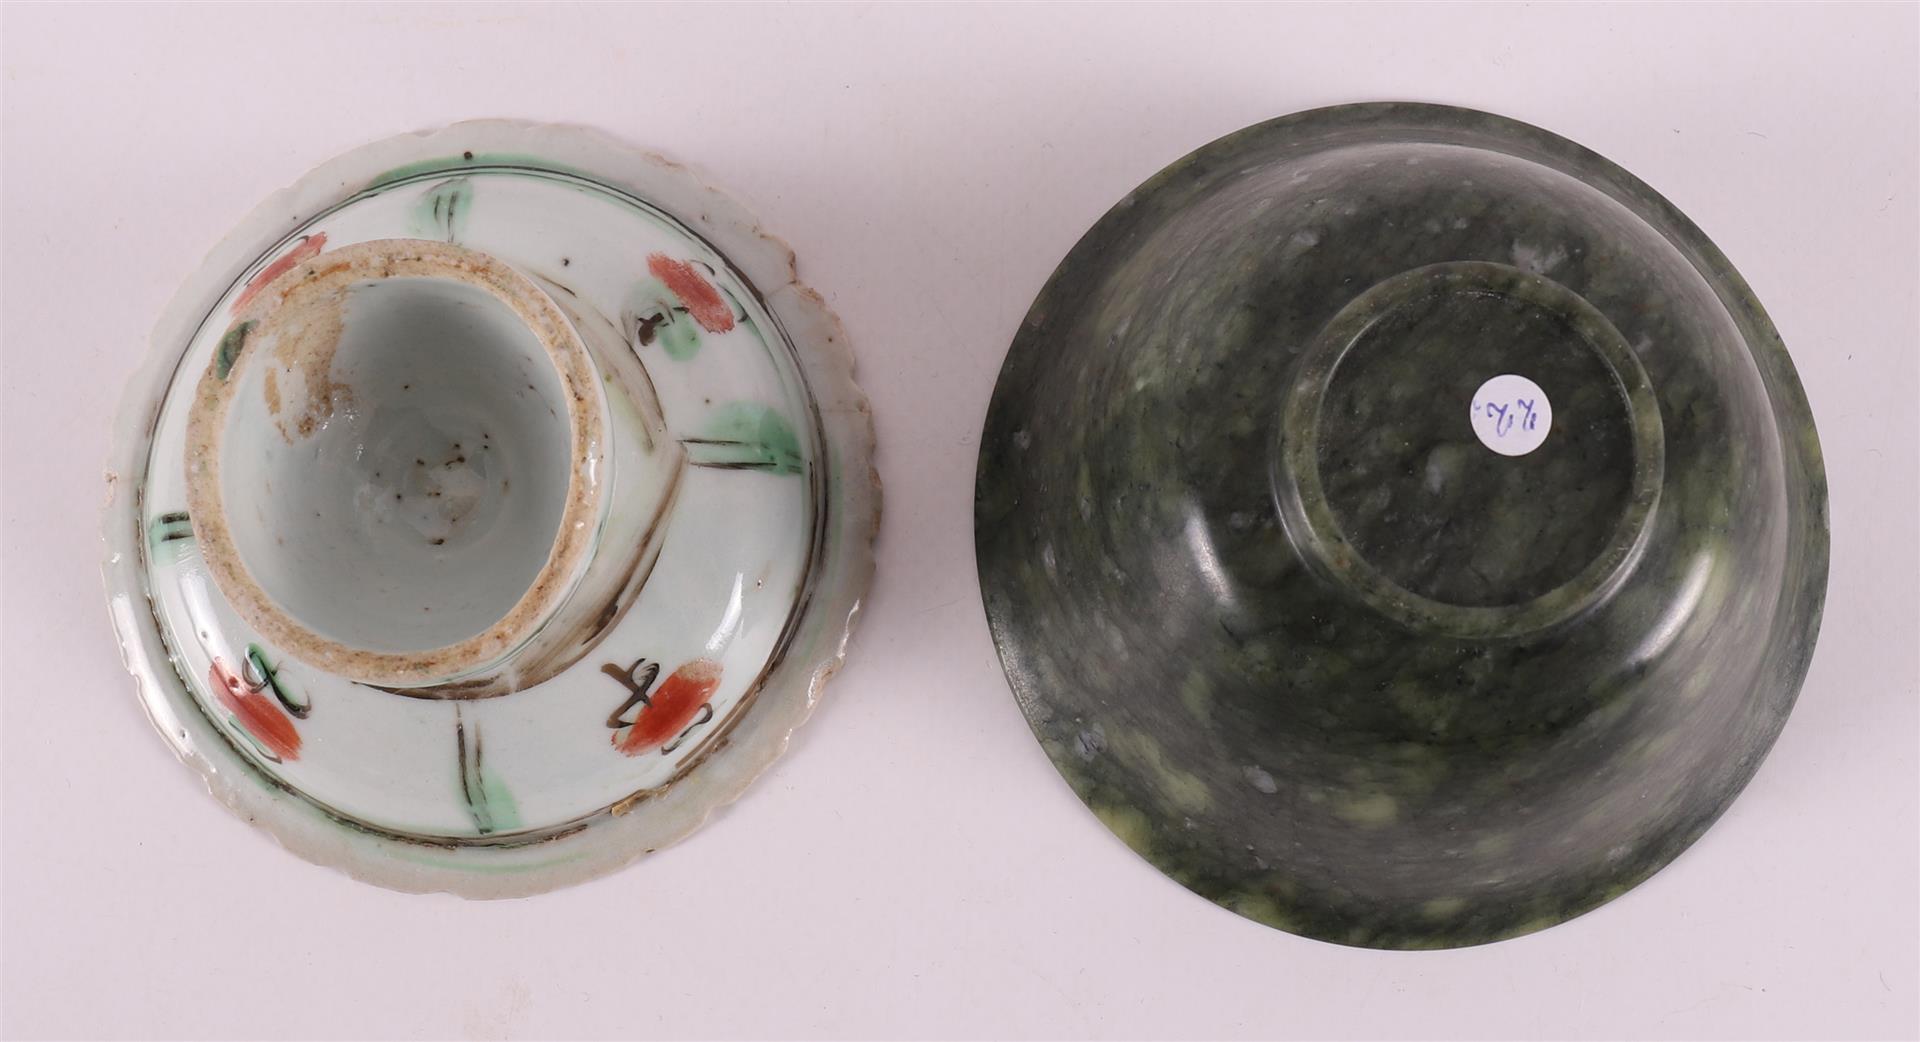 A porcelain tazza altar dish, China 18th/19th century. - Image 3 of 4